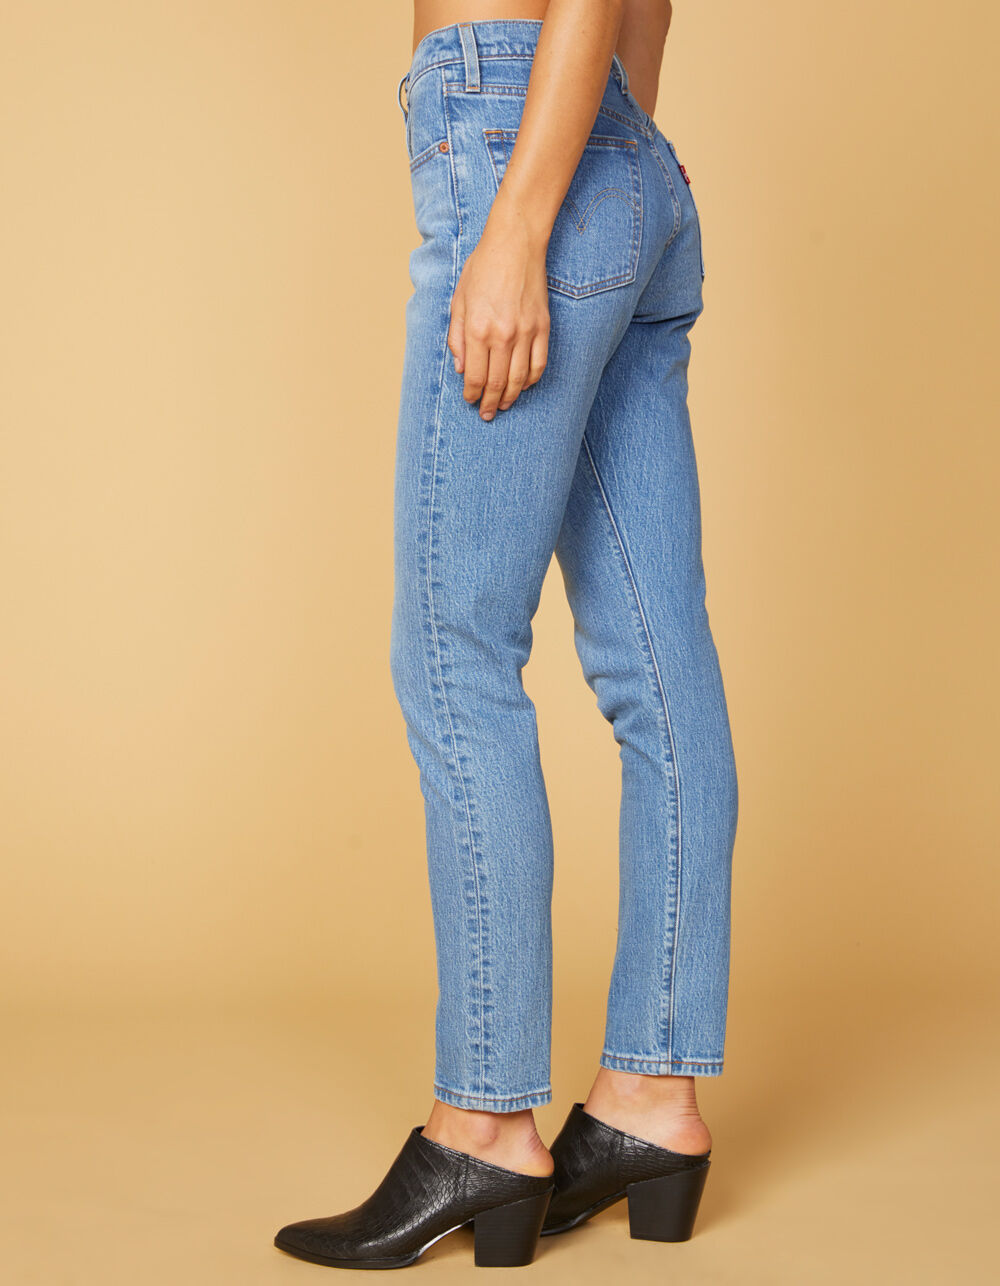 LEVI'S 501 Jive Love Womens Skinny Jeans image number 3